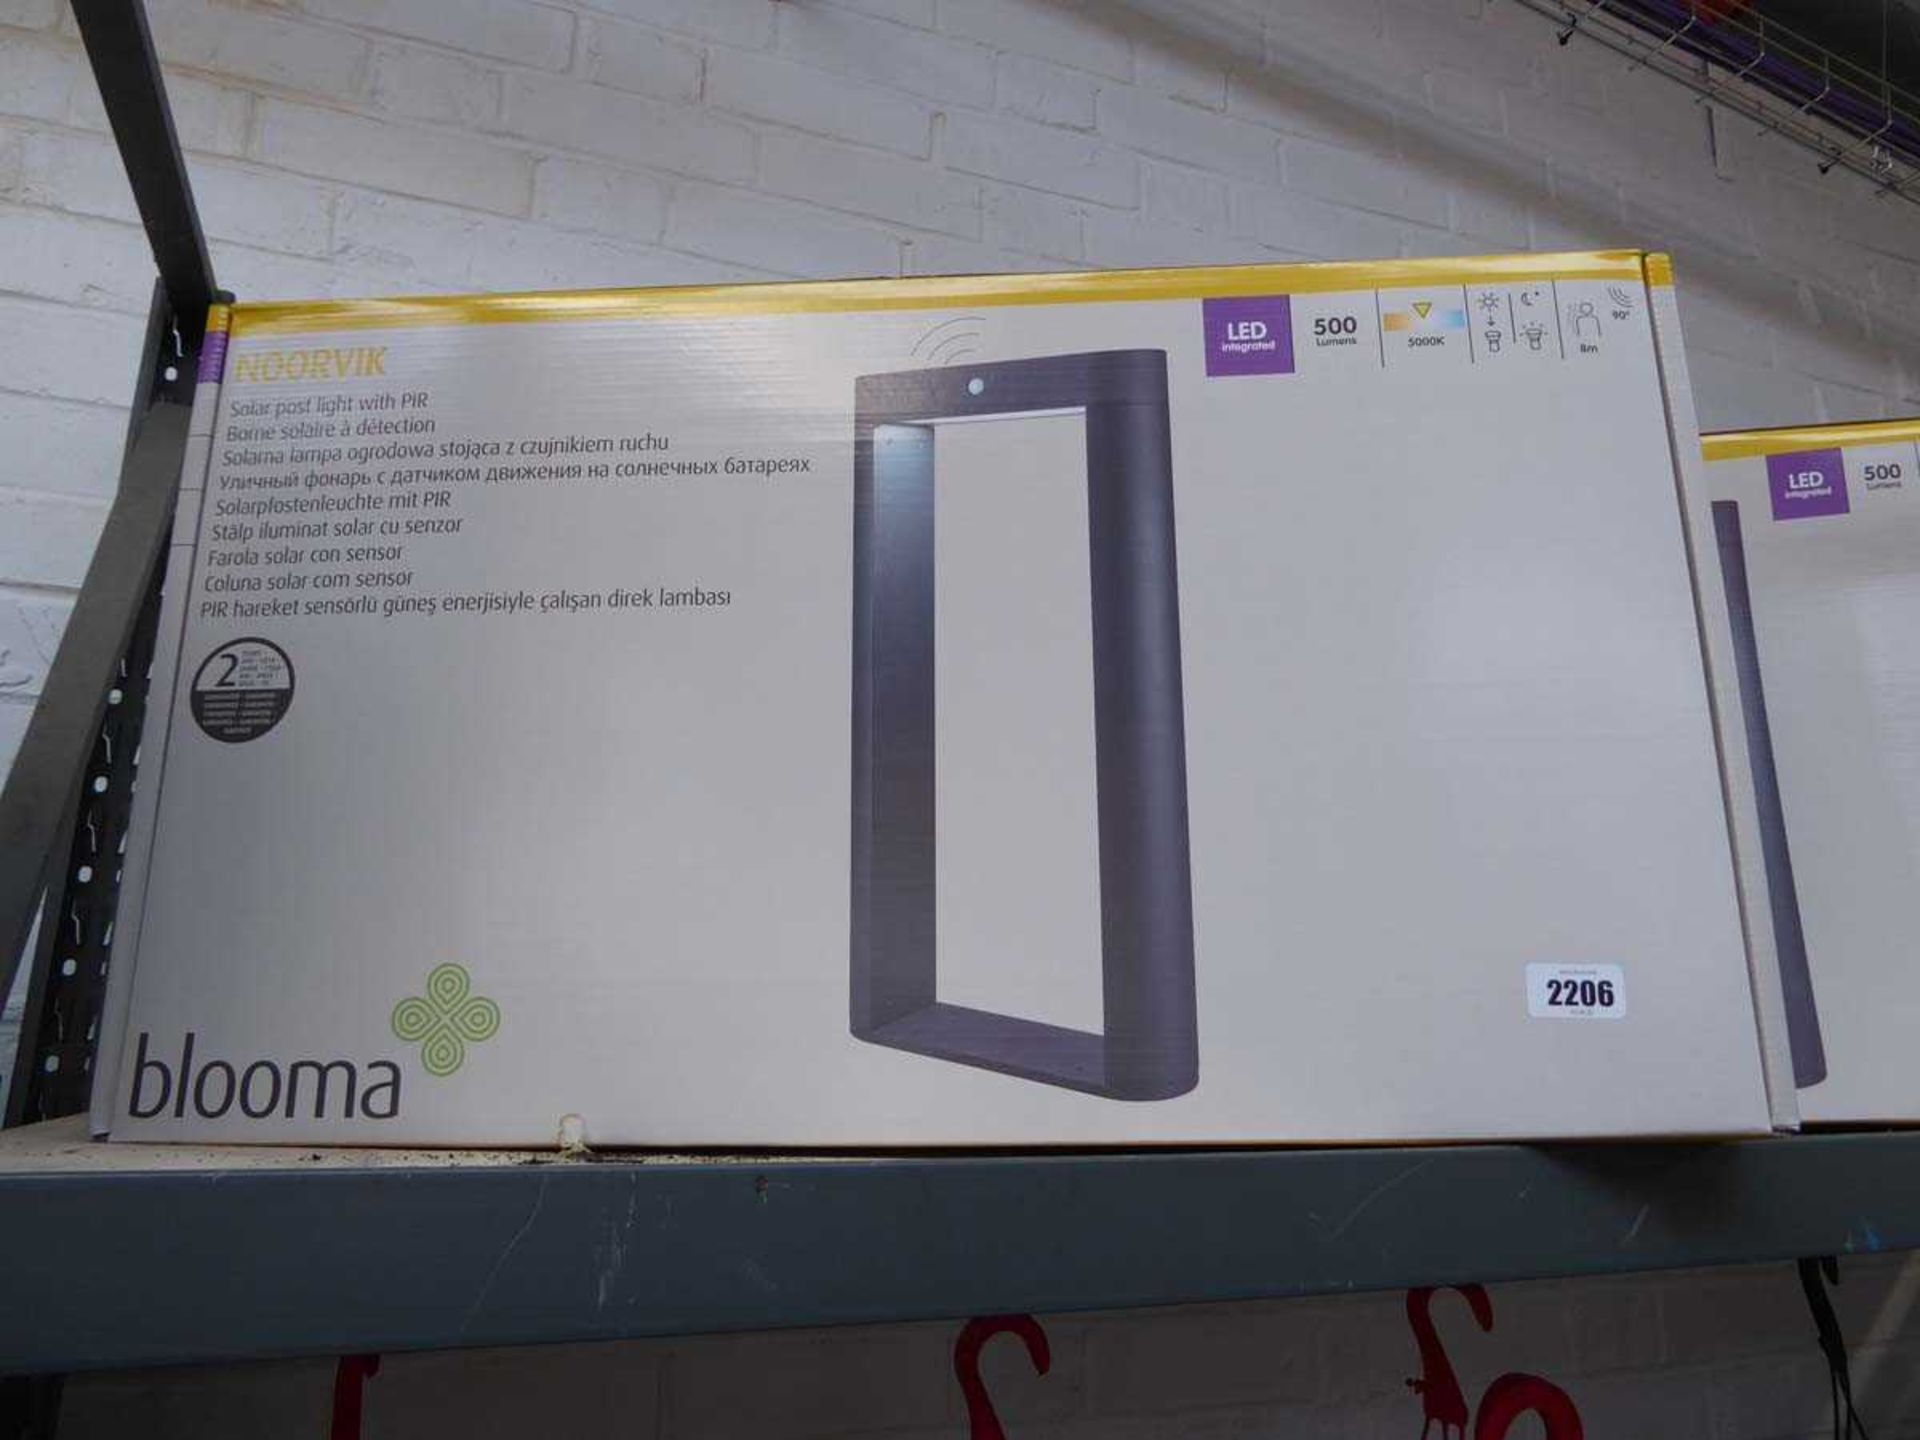 4 boxed Blooma Noorvik solar post lights with PIR - Image 2 of 2